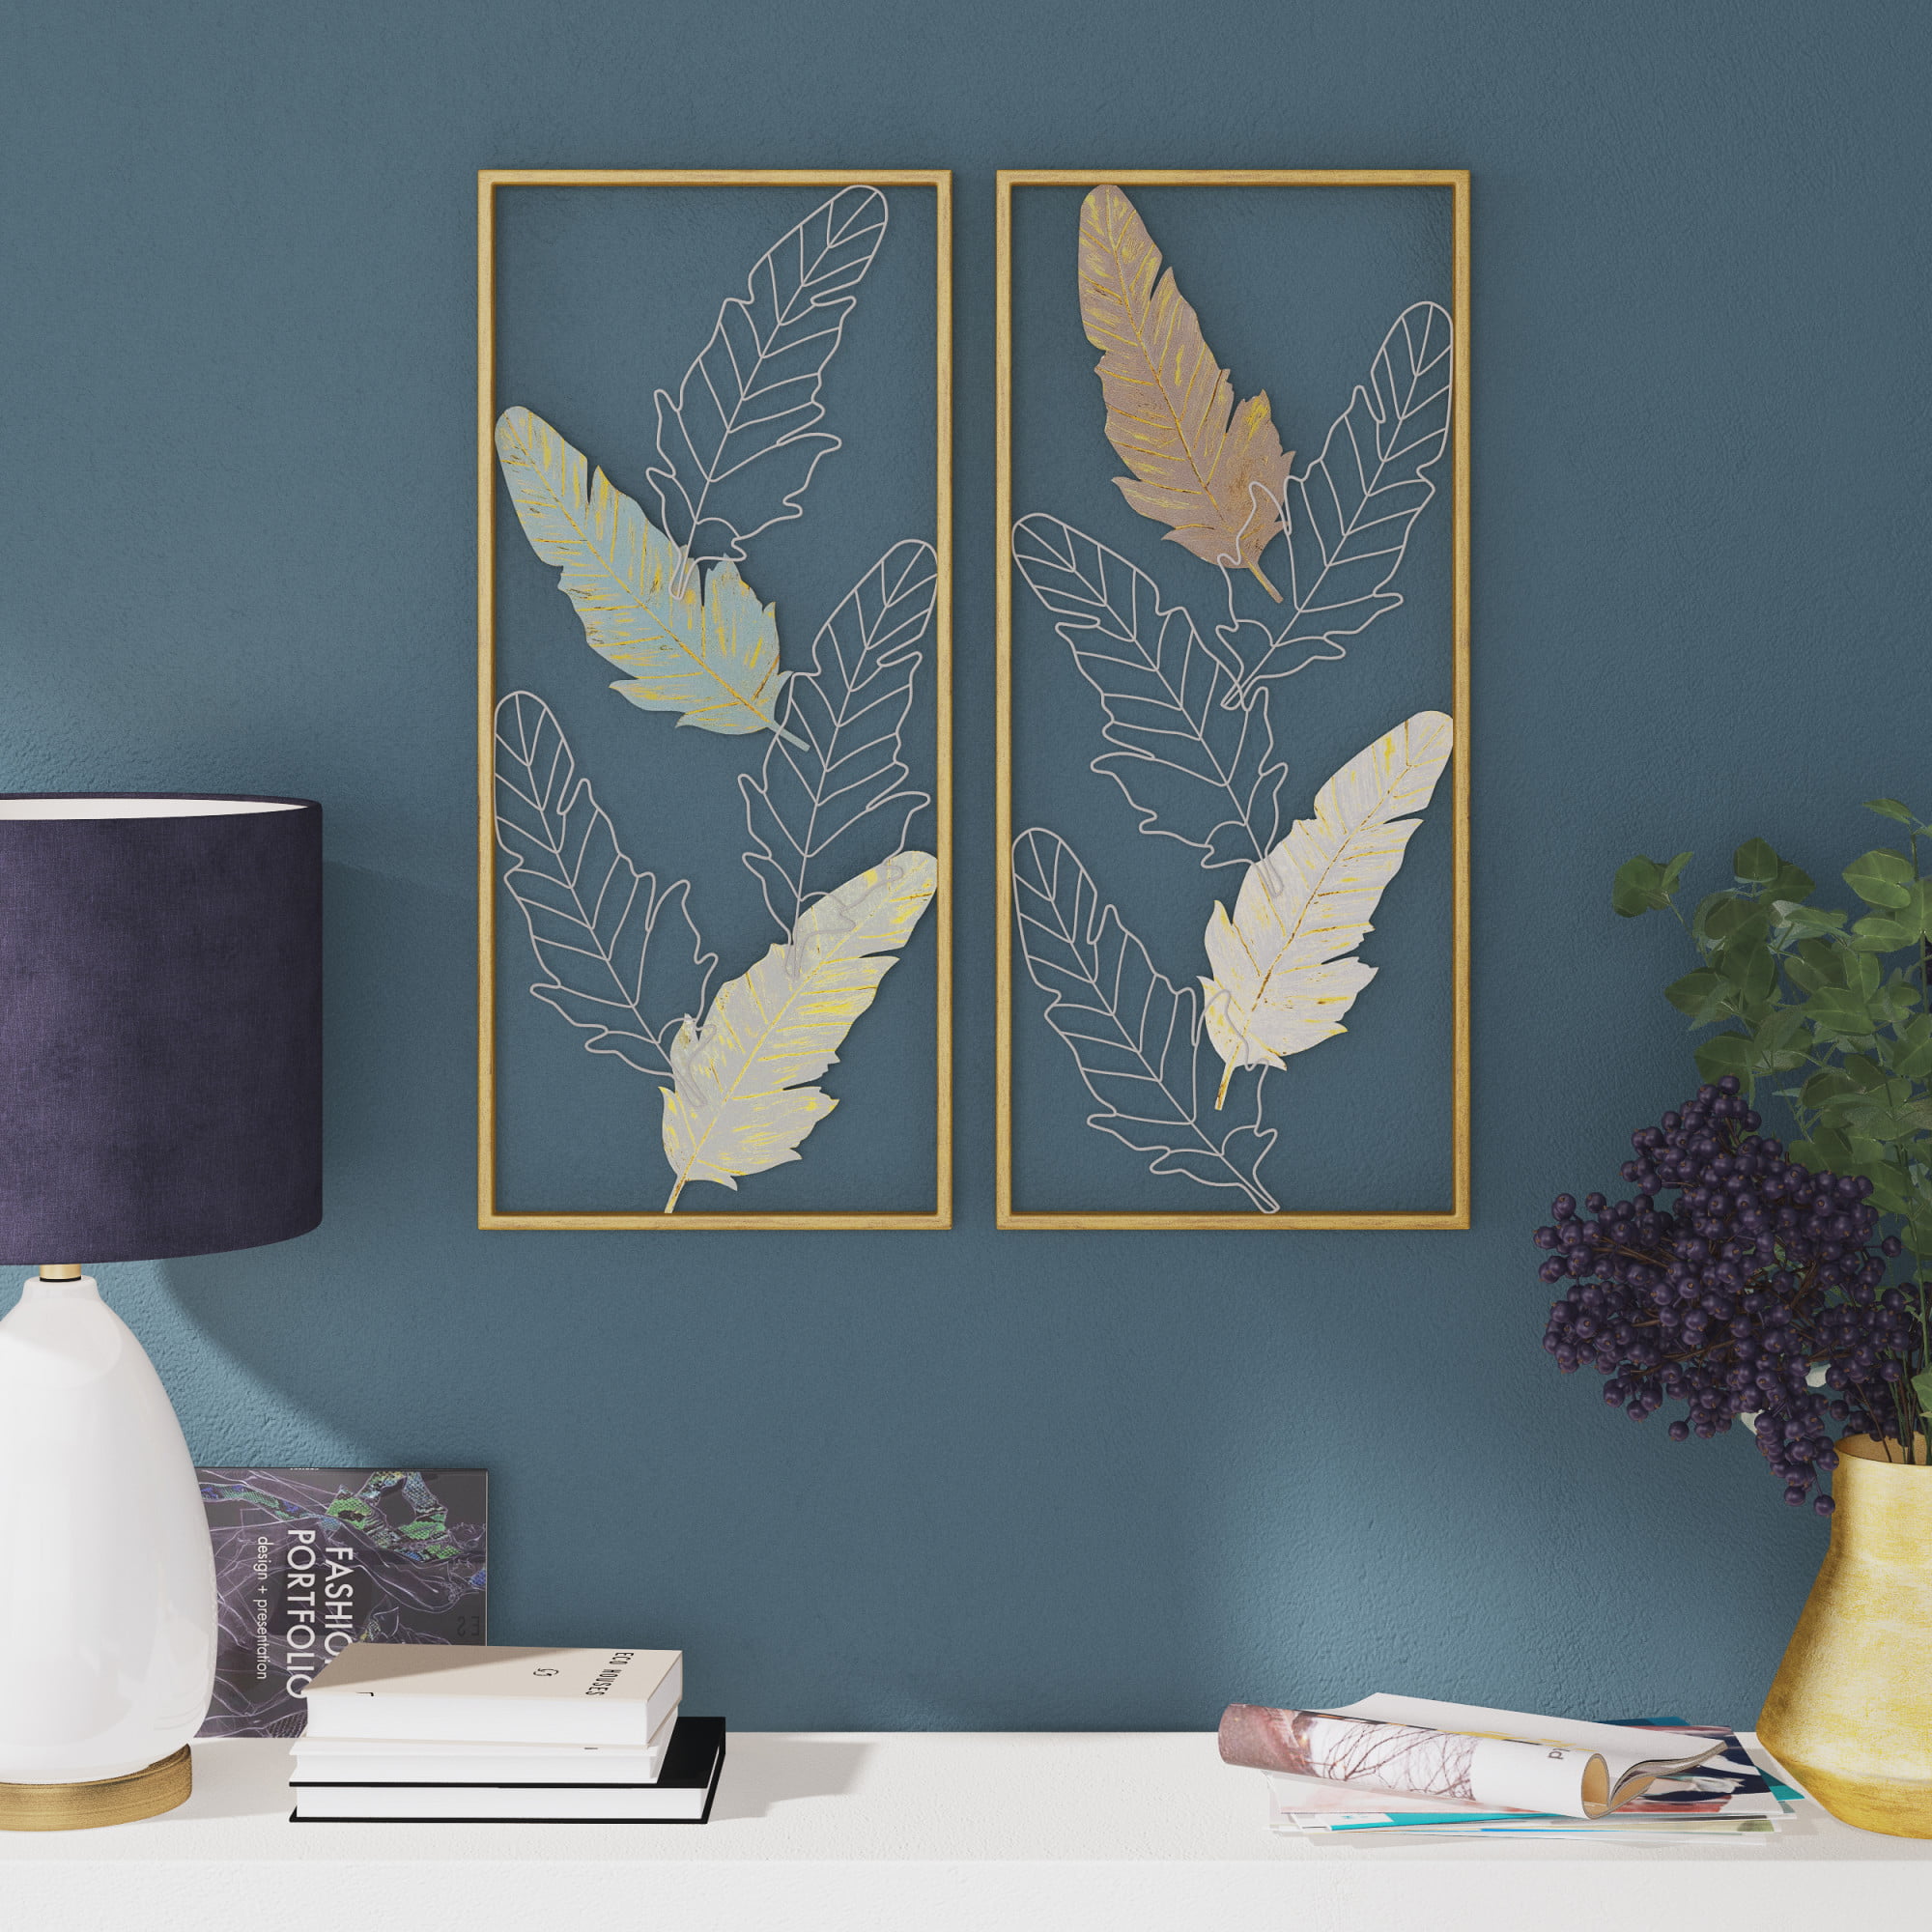 Wall Painting Leaf Design